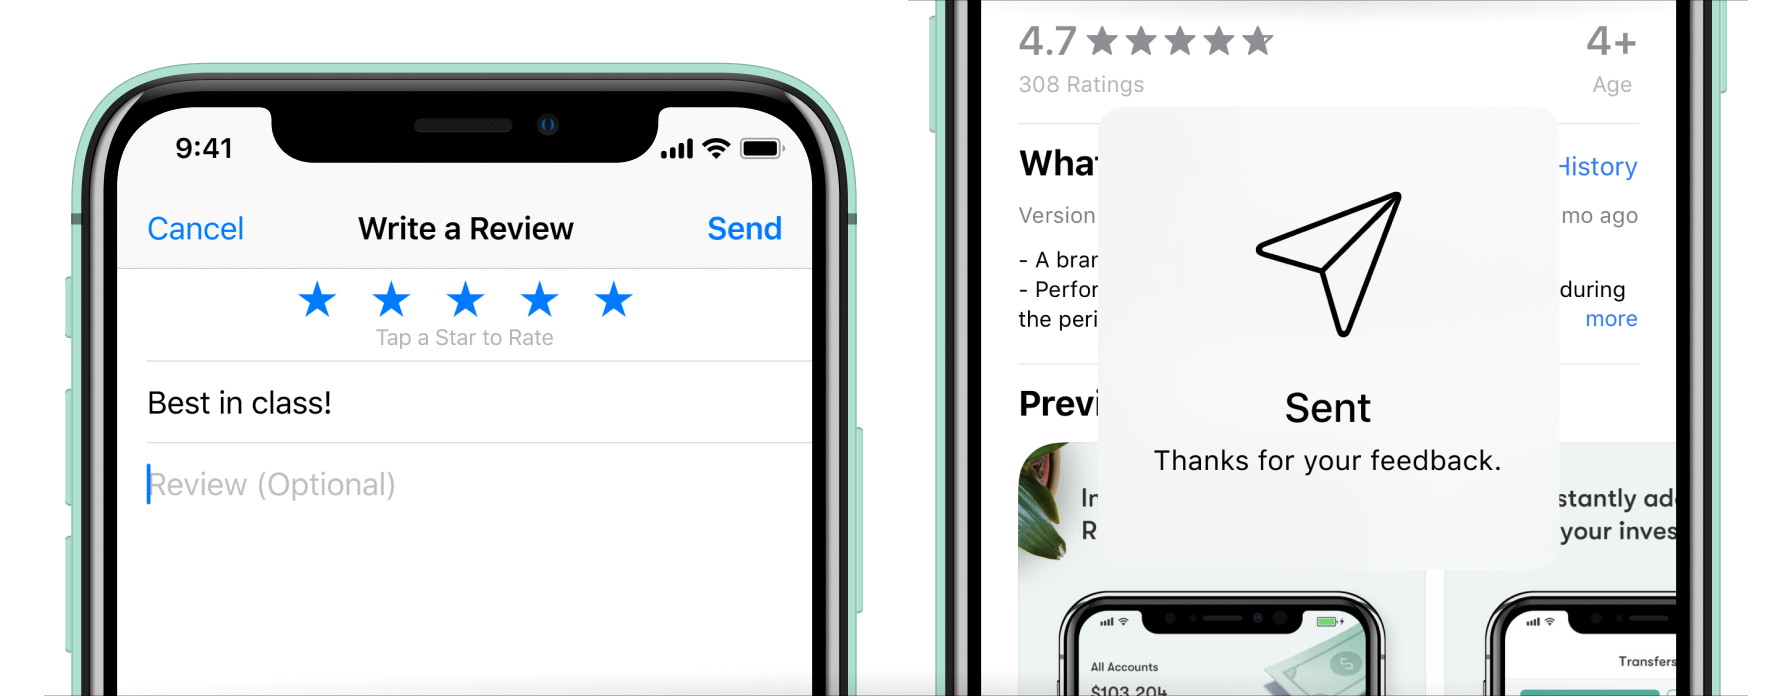 The iOS app store 'Write a review' form followed by a 'Sent' alert thanking you for your feedback